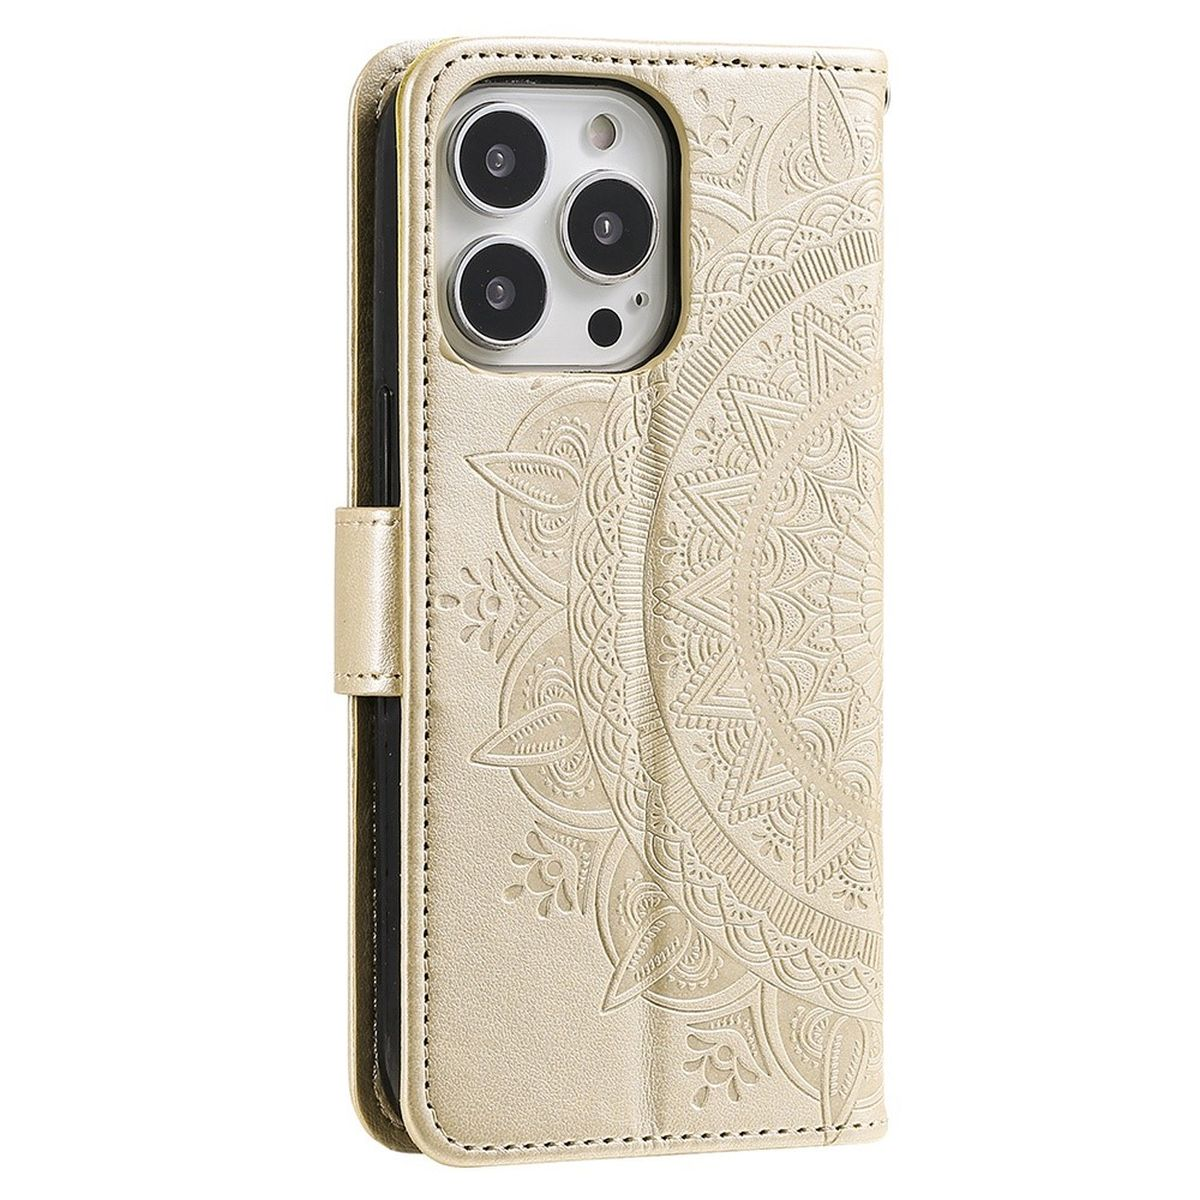 COVERKINGZ Klapphülle mit Mandala Muster, Pro Max, Bookcover, Gold 14 iPhone Apple